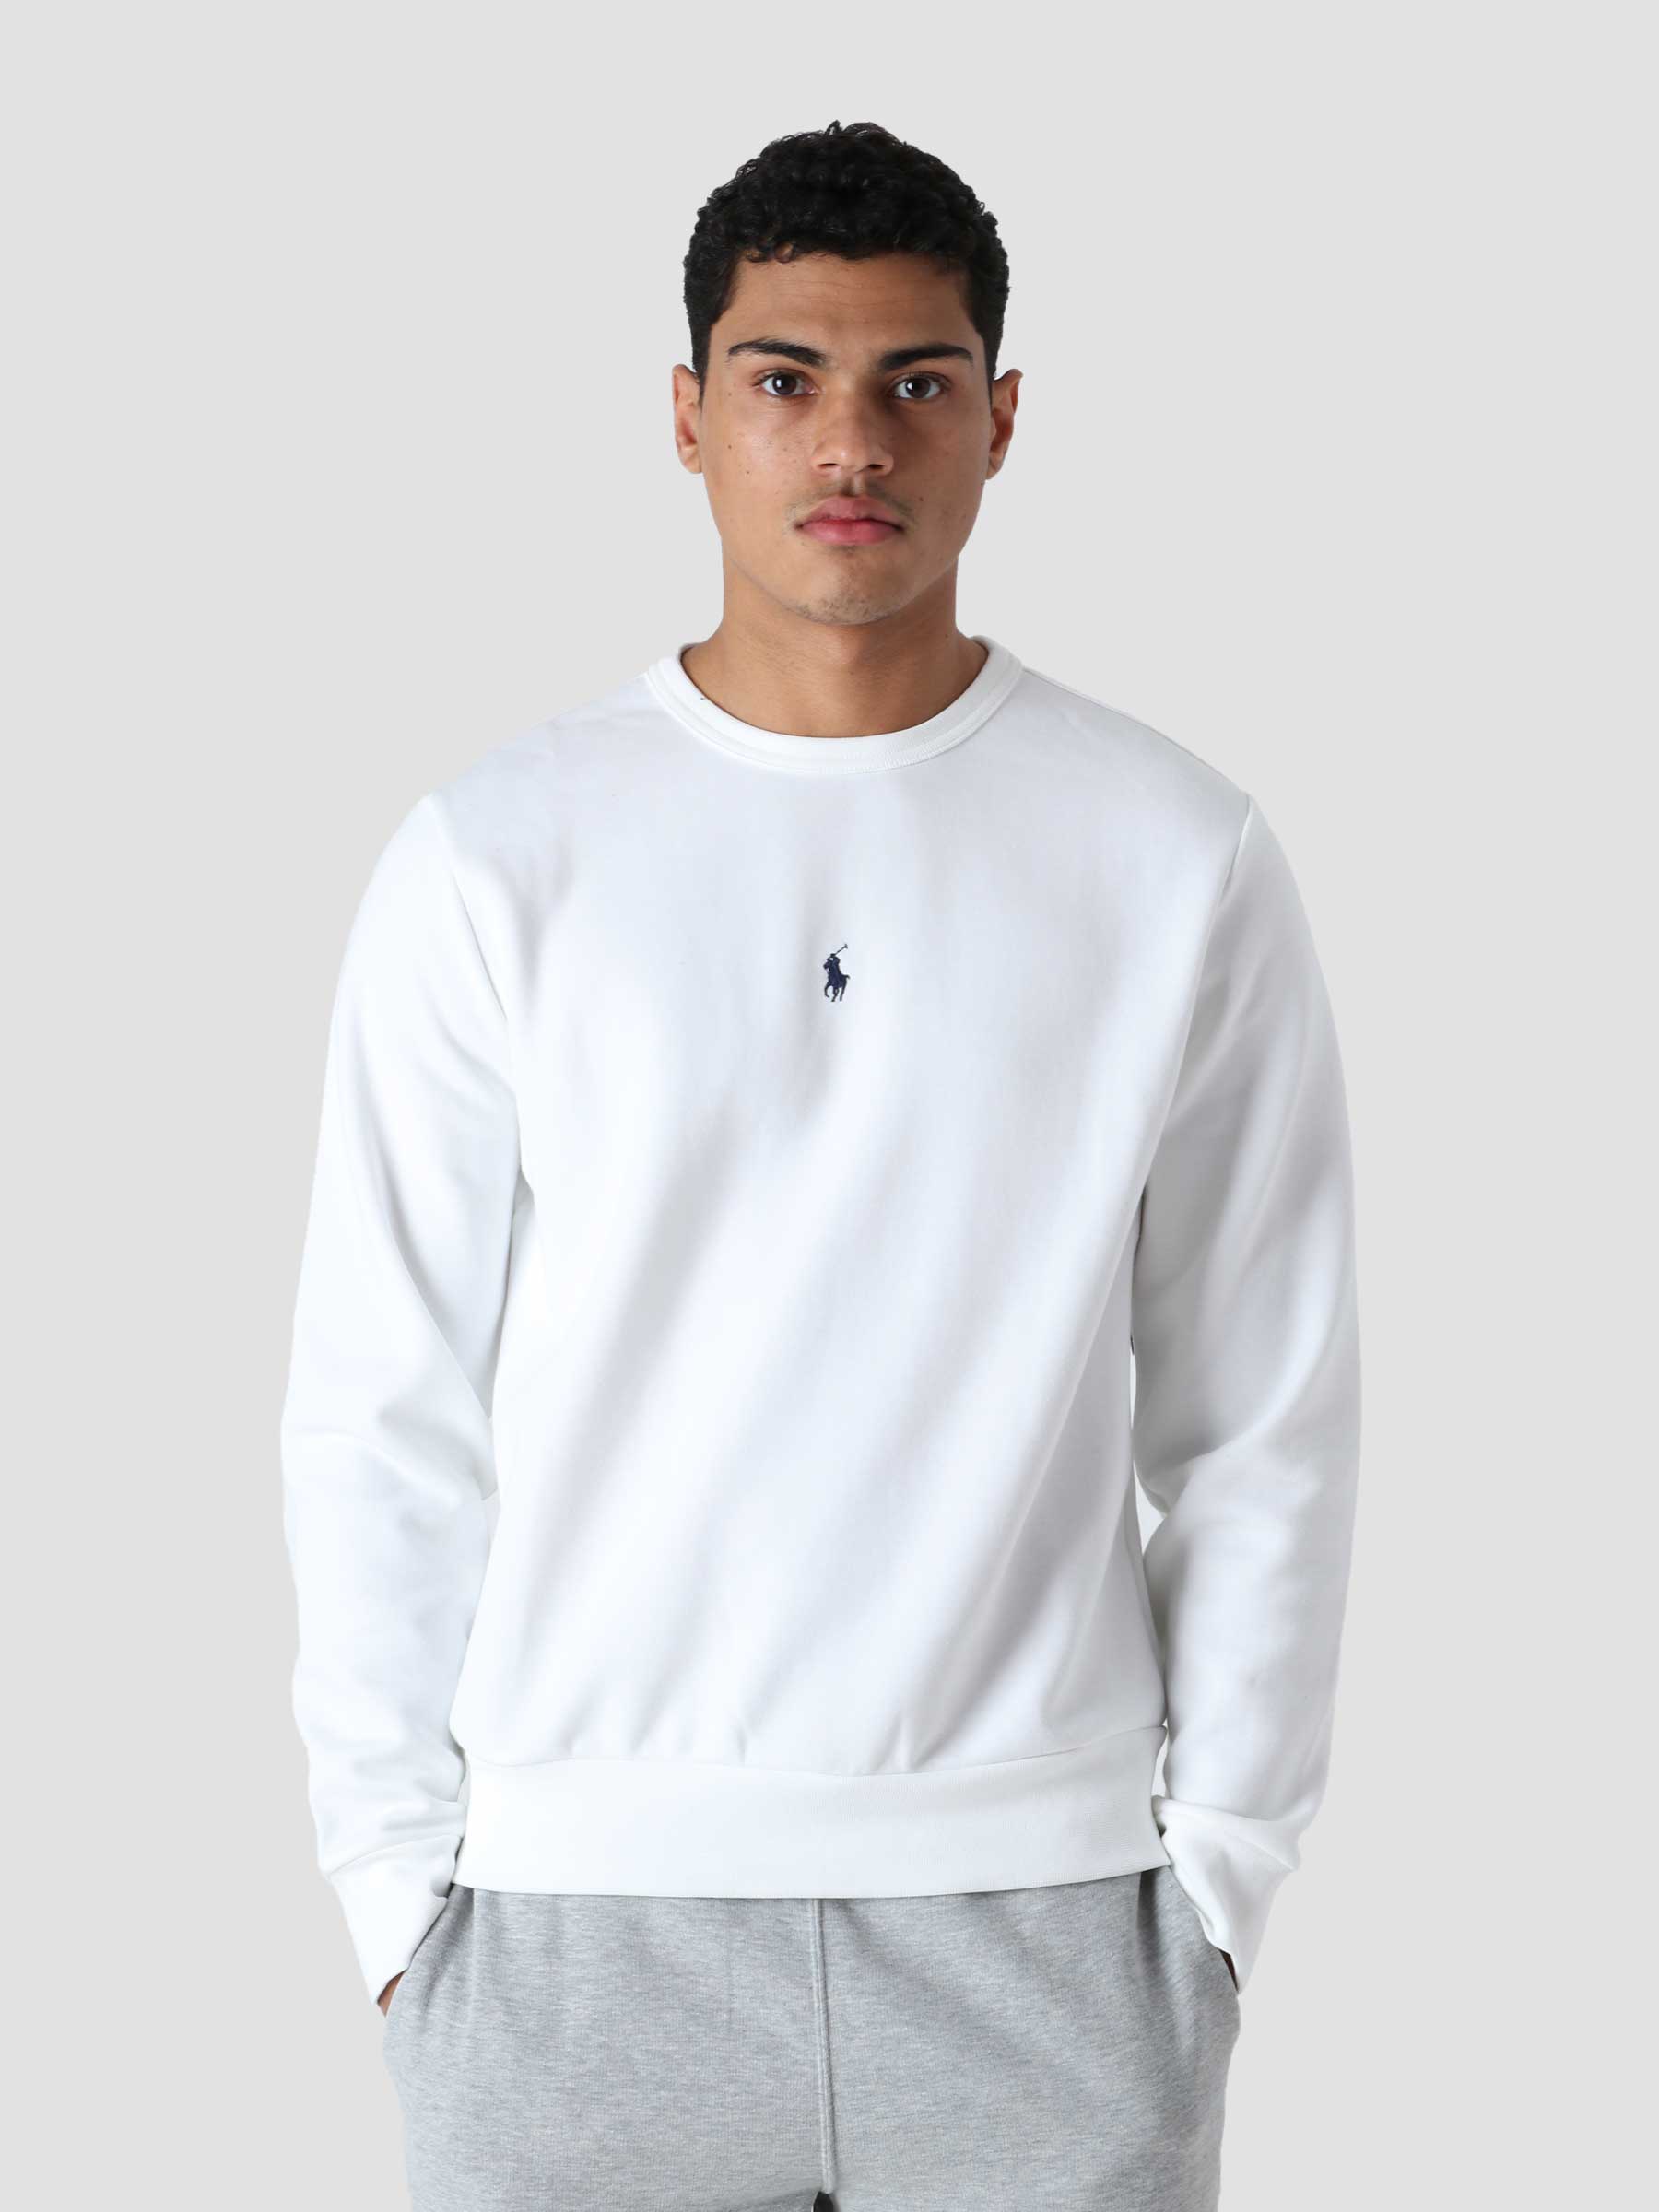 Knit Tech Crewneck Pullover White Navy Pp 710839048006